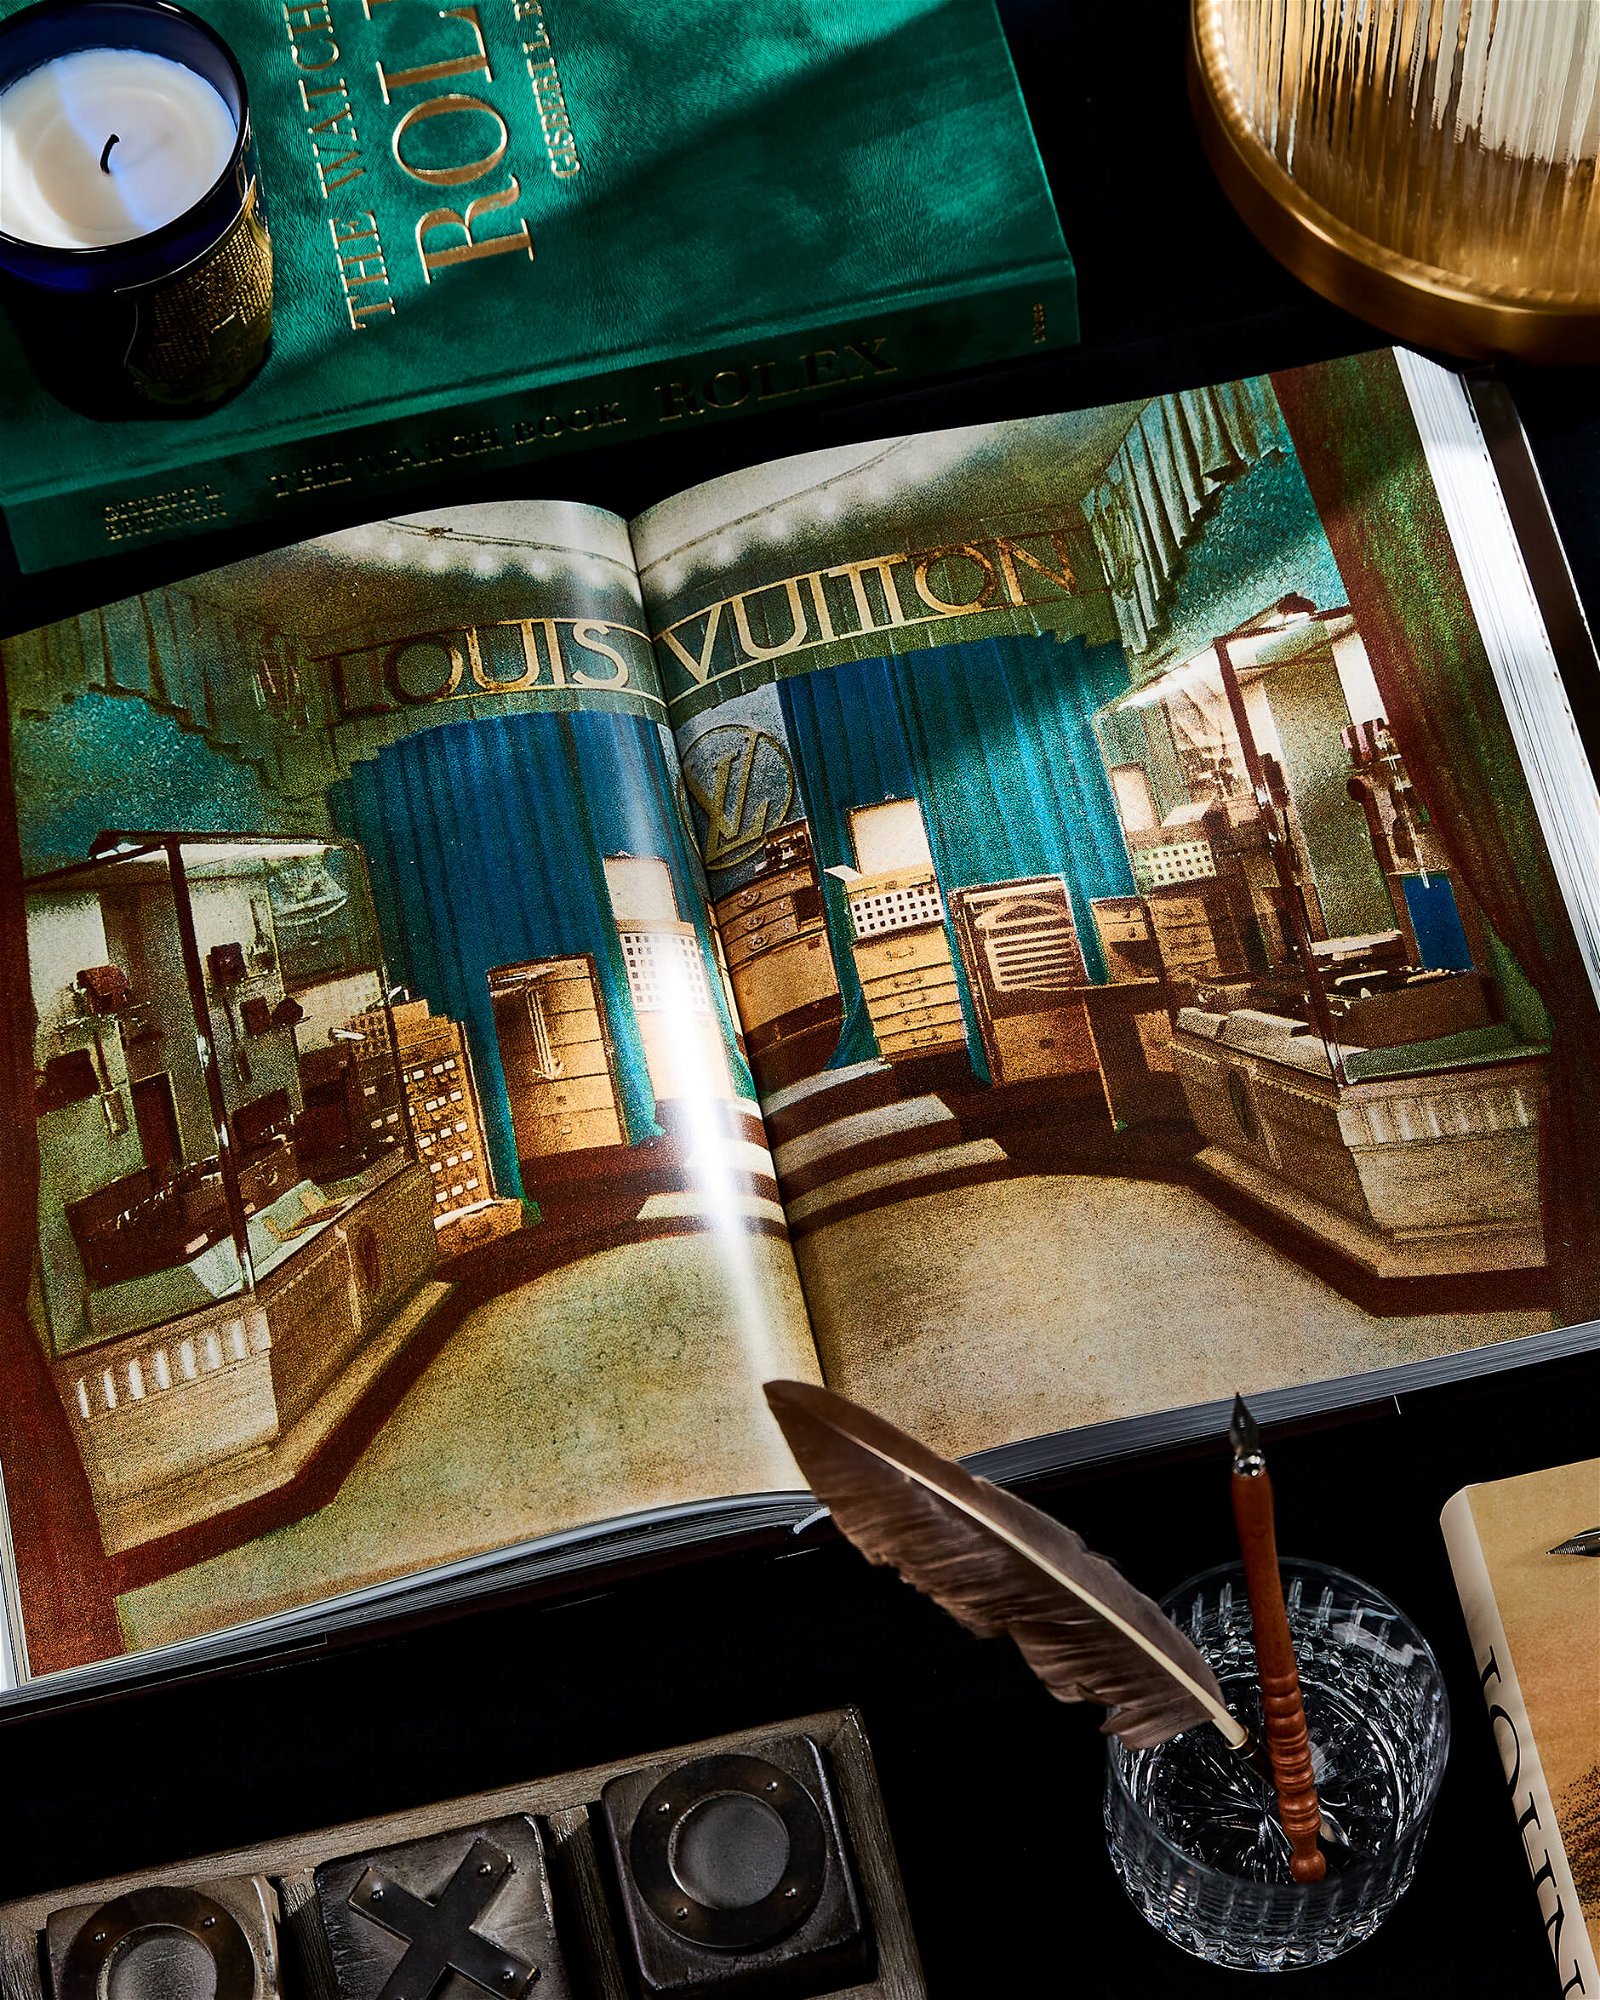 Louis Vuitton The Birth Of Modern Luxury Updated Edition Book, Luxury  Gifts